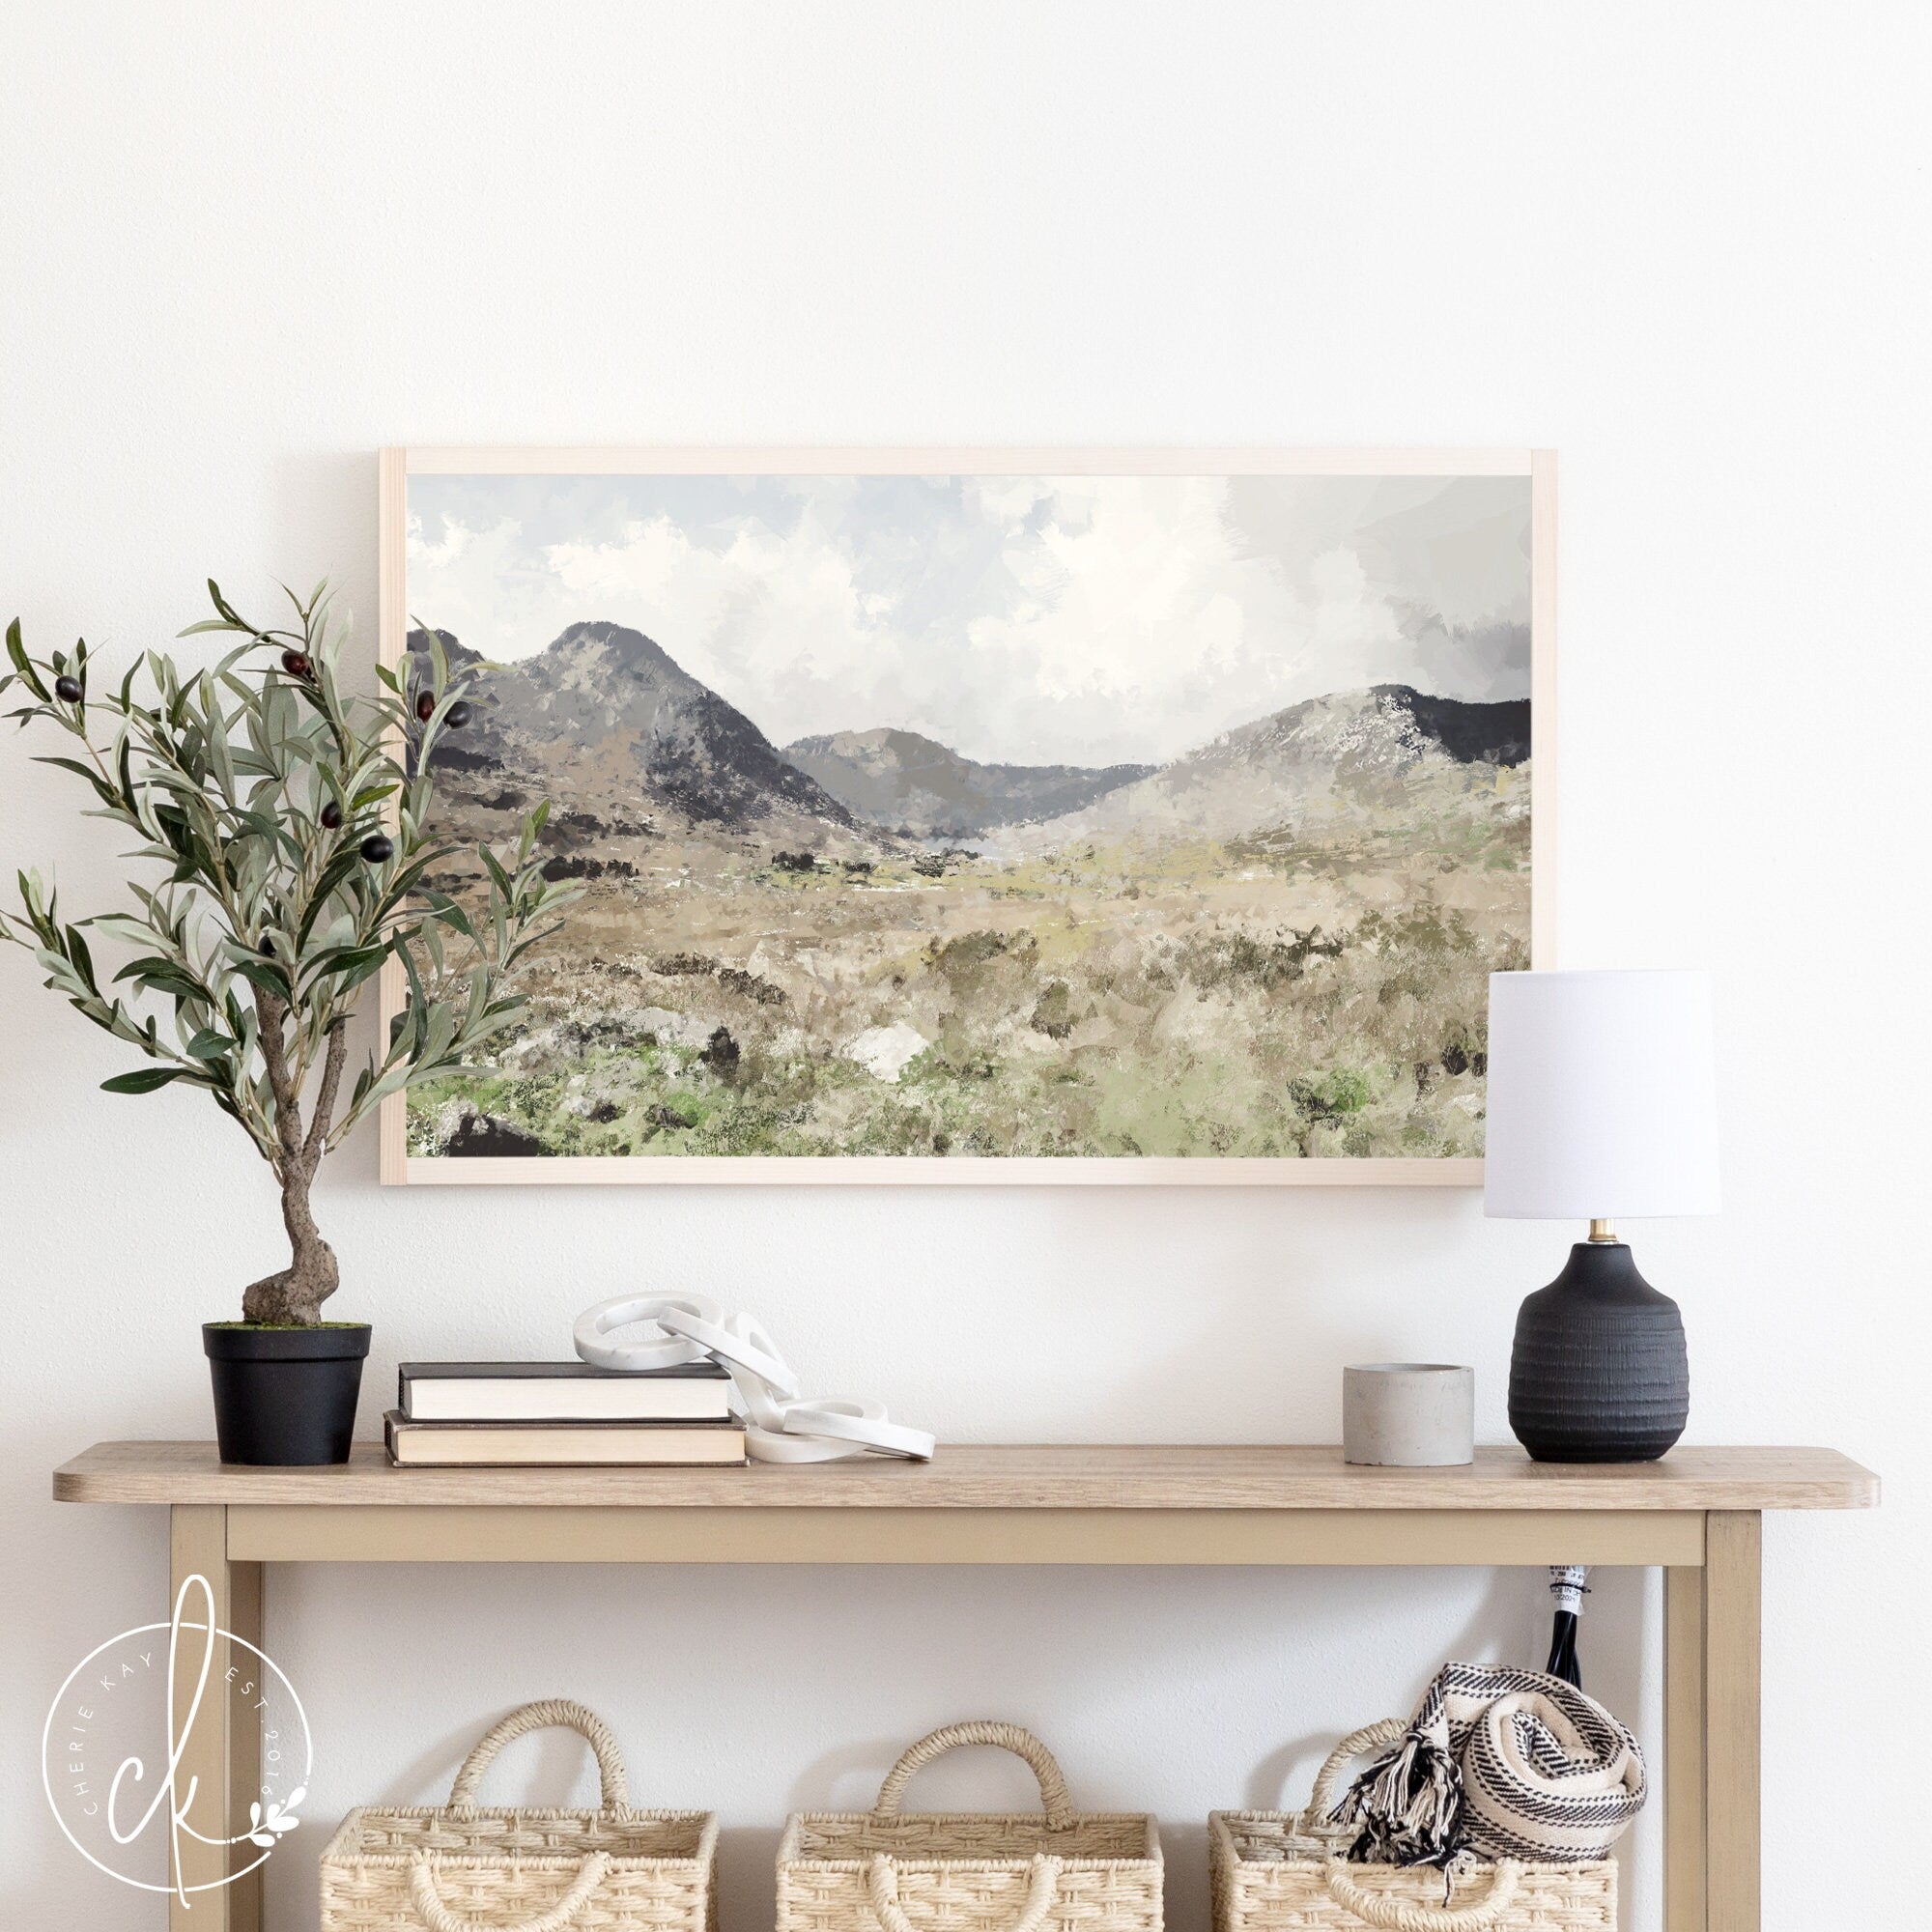 This is a painting of mountain wall art. The landscape has a meadow and mountains in the distance. The painting is framed in a pine frame and is displayed above a table with modern decor.